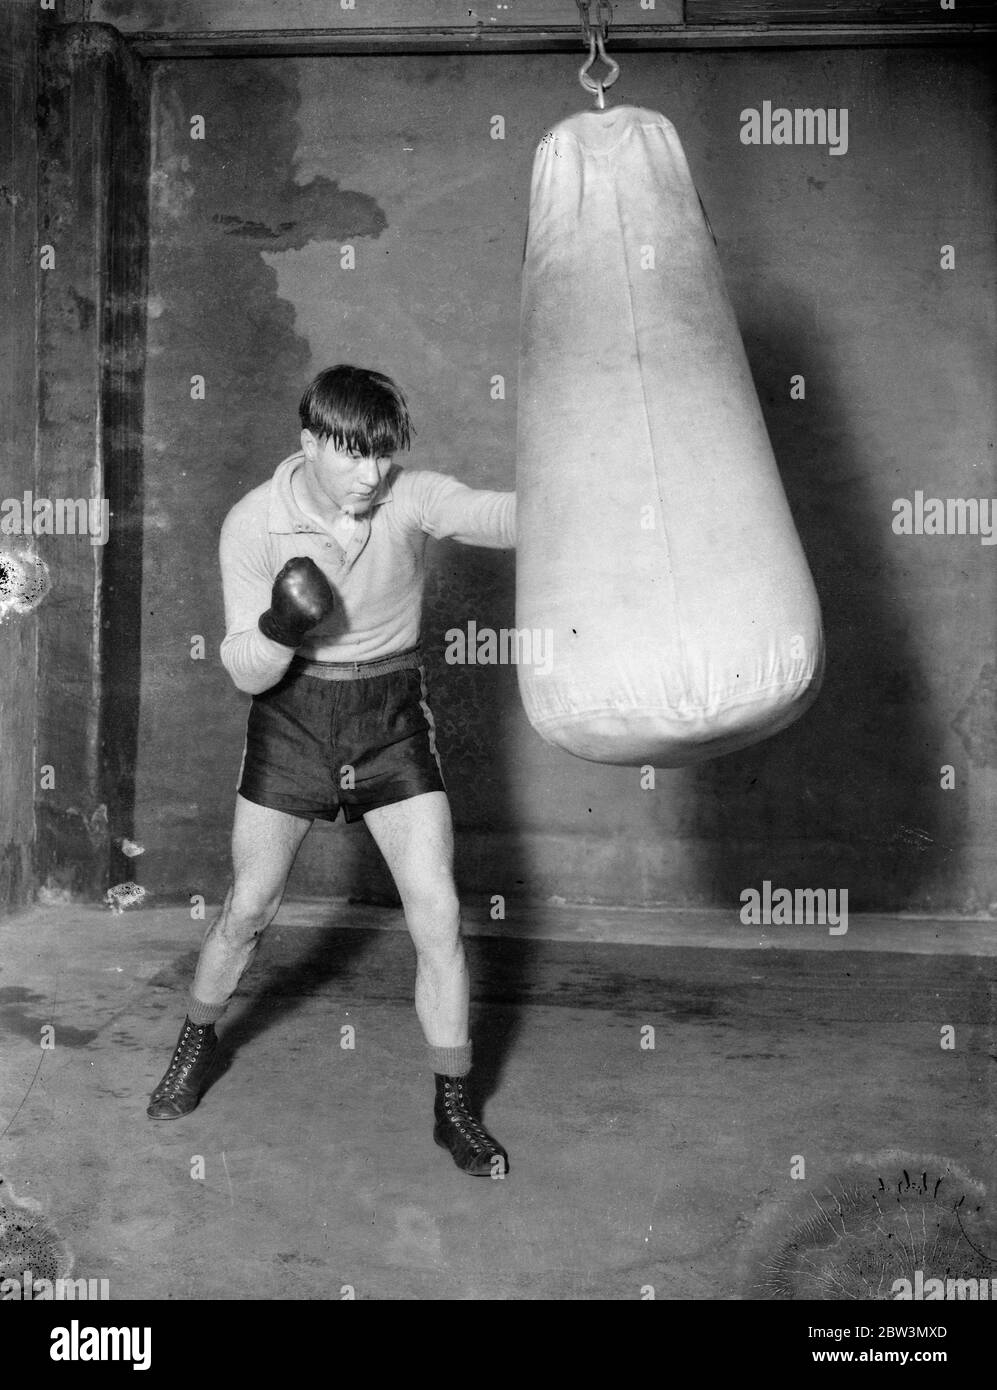 Daly puts punch into it . Training for match with Humsby . George Daly , the Blackfrisrs light weight is training at the Ring gymnasium Blackfriars , for his ten round match with Gustave Humery , the French Tiger and conqueror of Kid Berg . Daly , winner of the Control Board ' s series of light weight eliminators but ruled out ruled out because of his revolt against purse conditions , is hoping to prove that he is the rightful contender for Berg ' s British Championship . Photo shows , George Daly punching a bag during training at the Ring gymnasium . 10 January 1936 Stock Photo